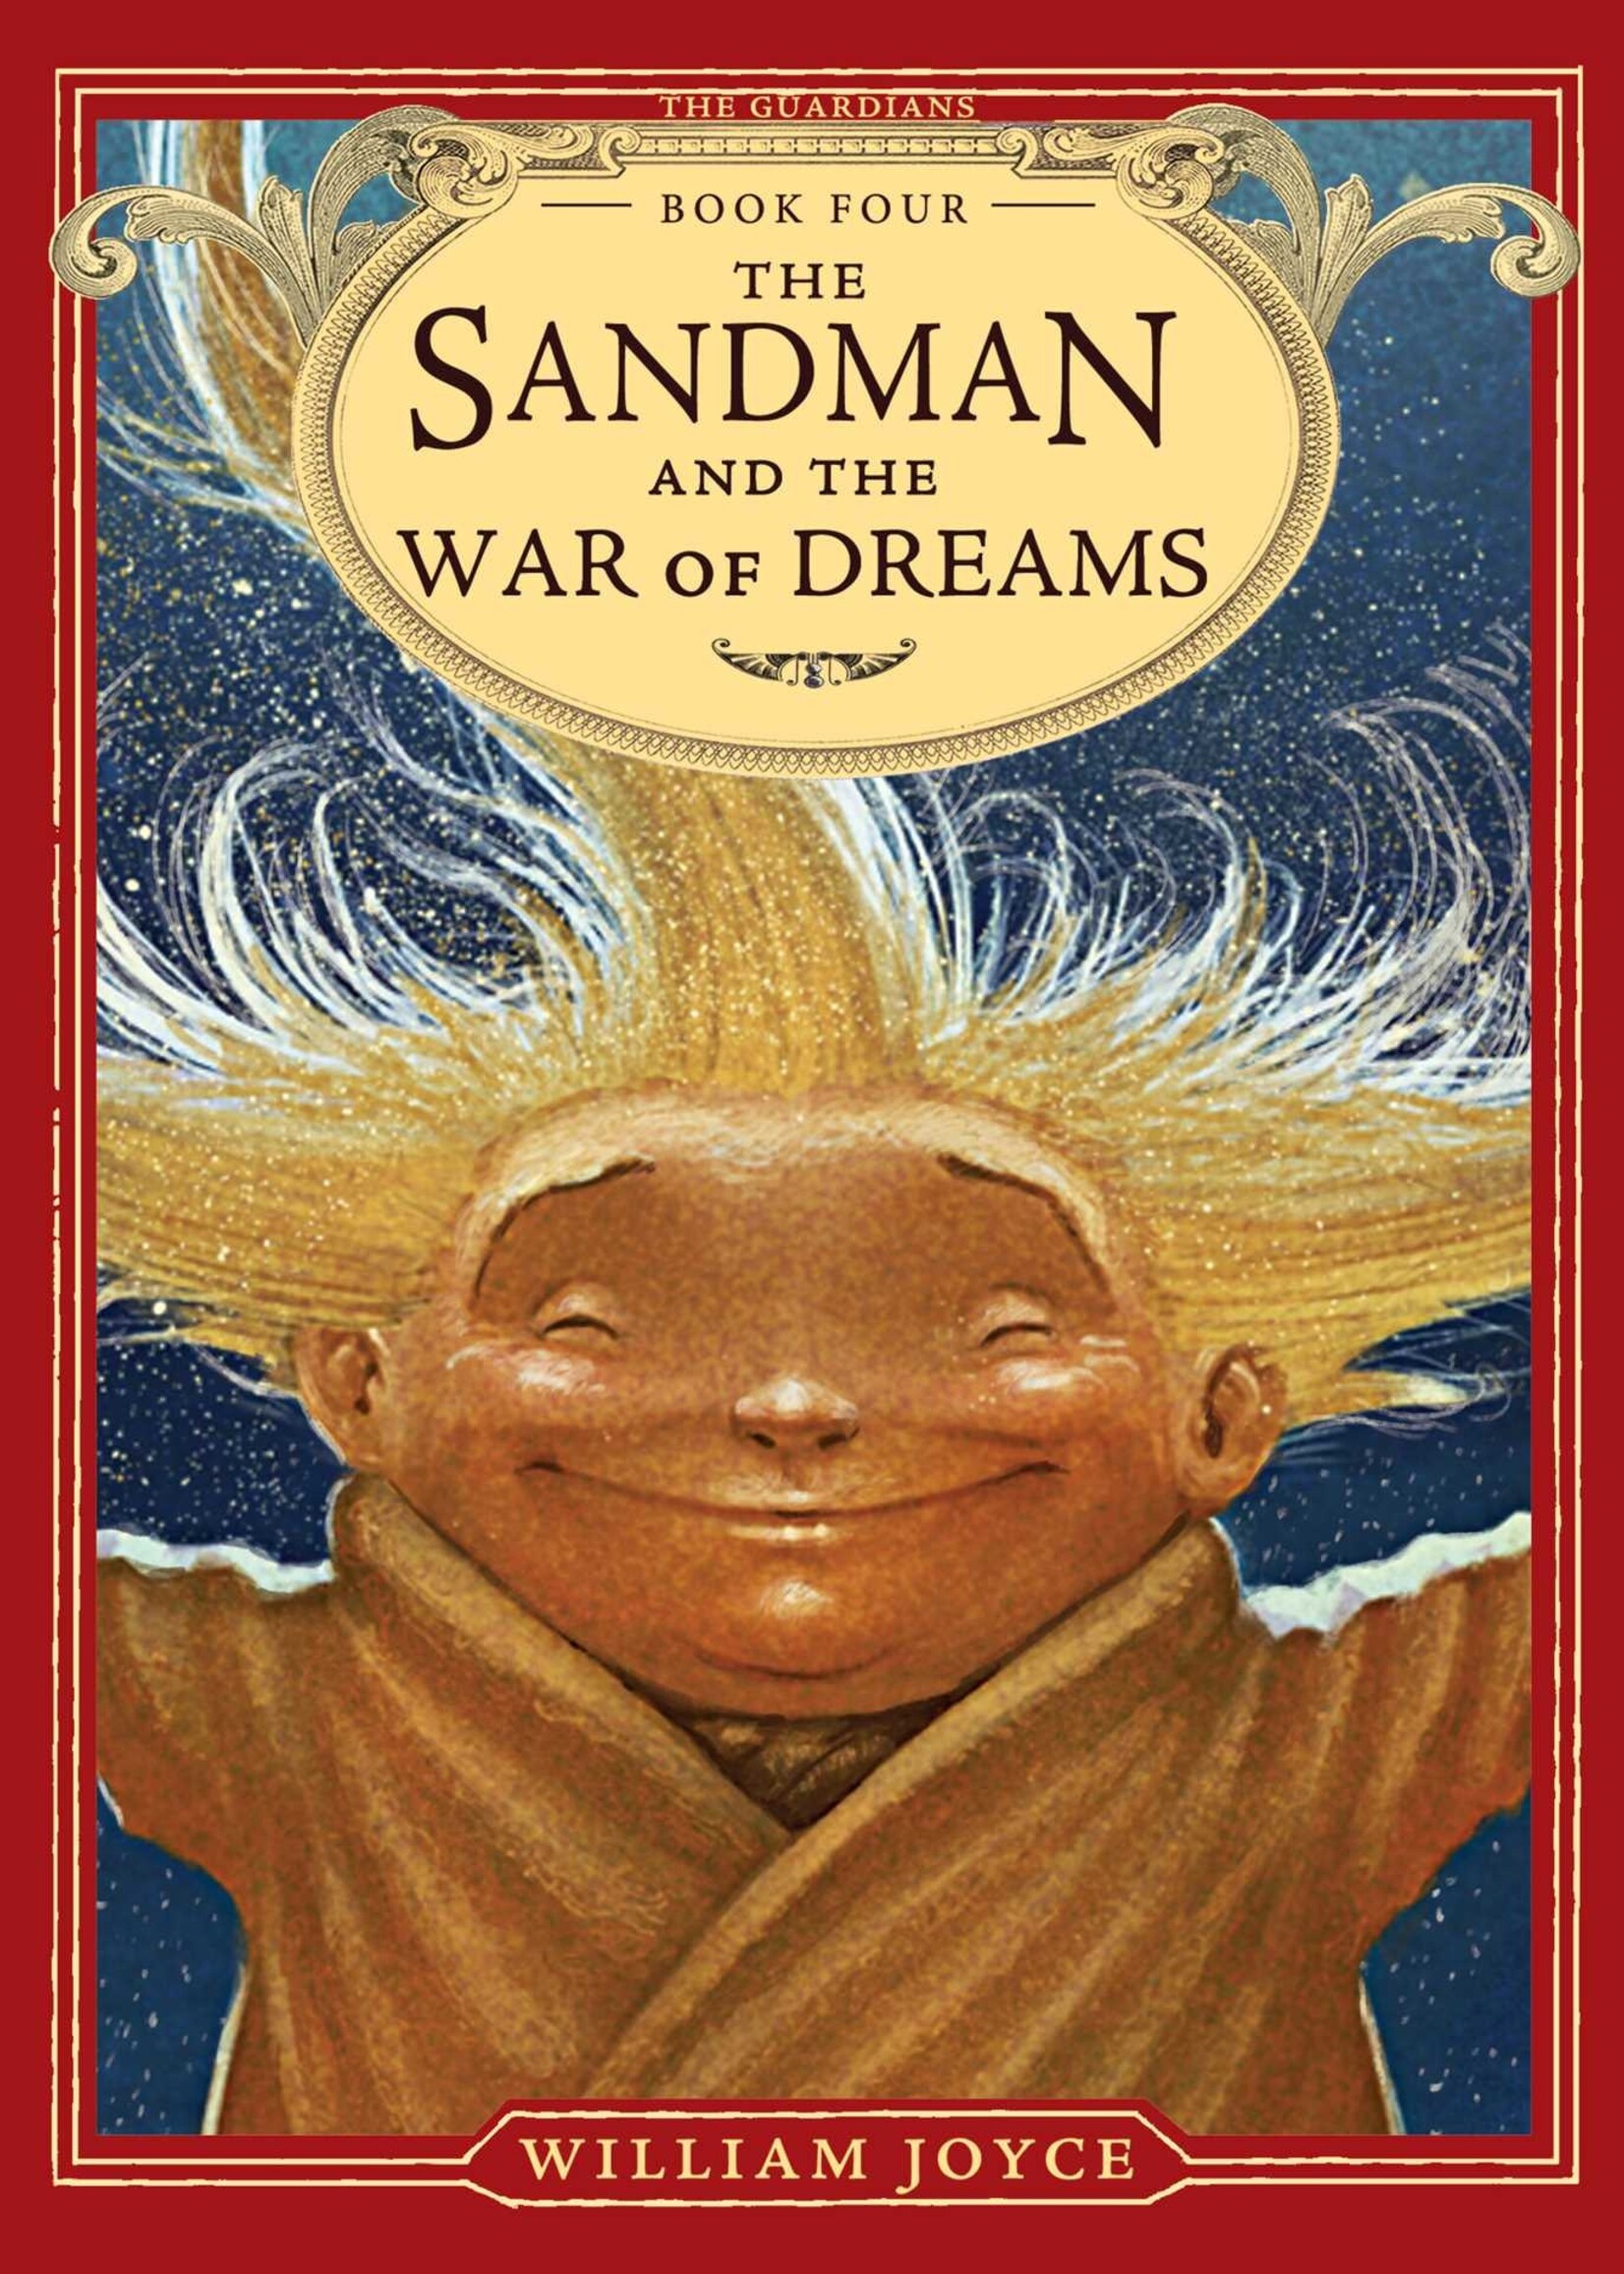 The Guardians #04, The Sandman and the War of Dreams - Paperback